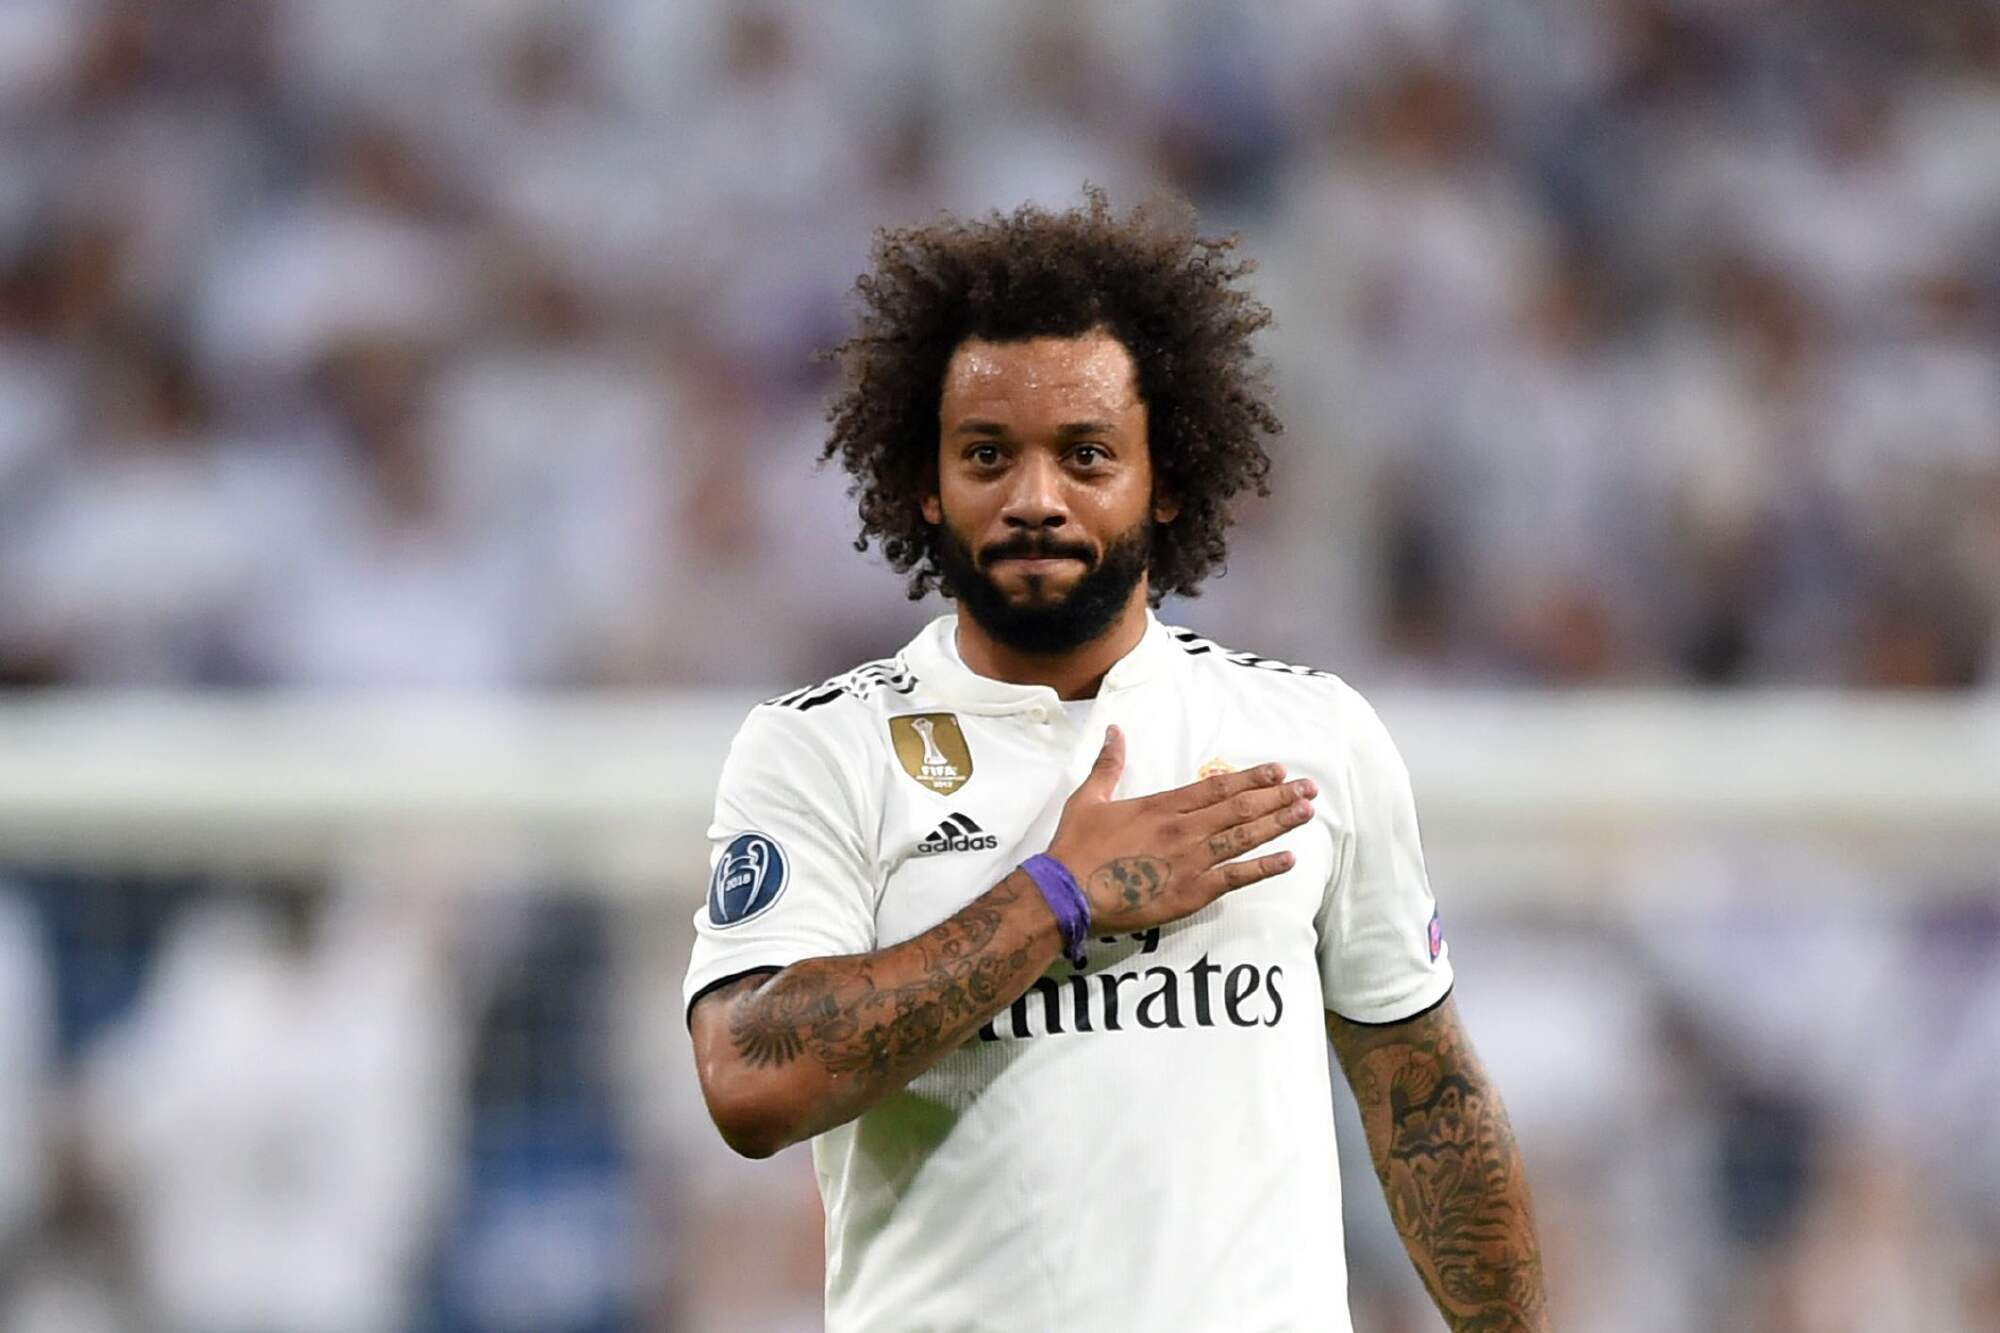 Nigerian lady hilariously recounts how she met Marcelo without knowing who he is